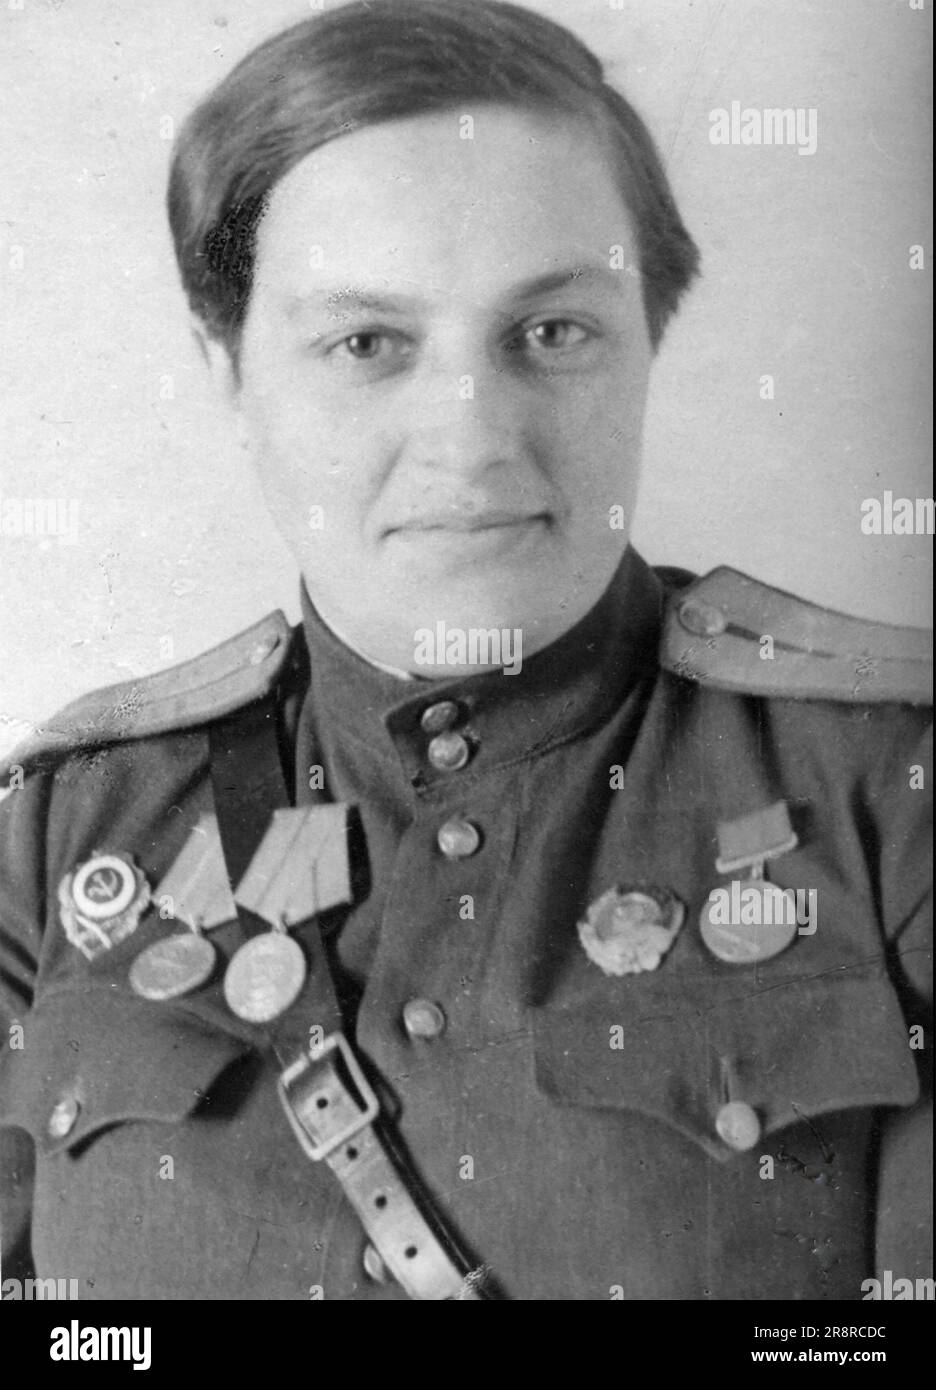 LYUDMILA PAVLICHENKO  (1916-1974) Ace Soviet sniper with the Red Army in WW2. photographer in 1942. Photo: SIB Stock Photo